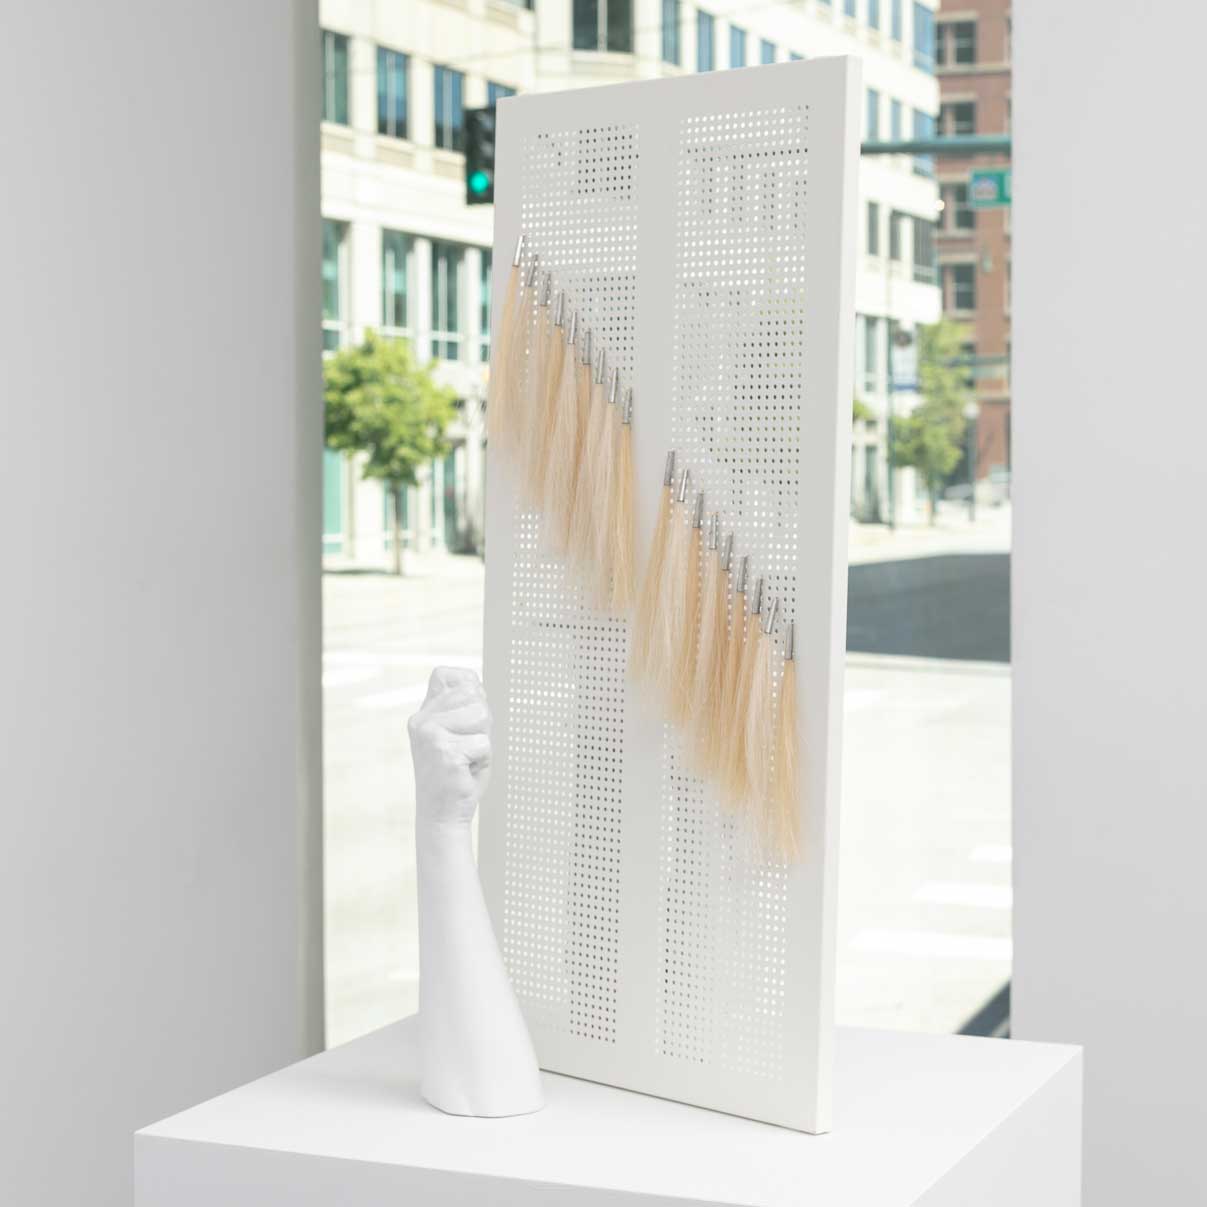 White sculpture on a plinth, photographed in front of a window.